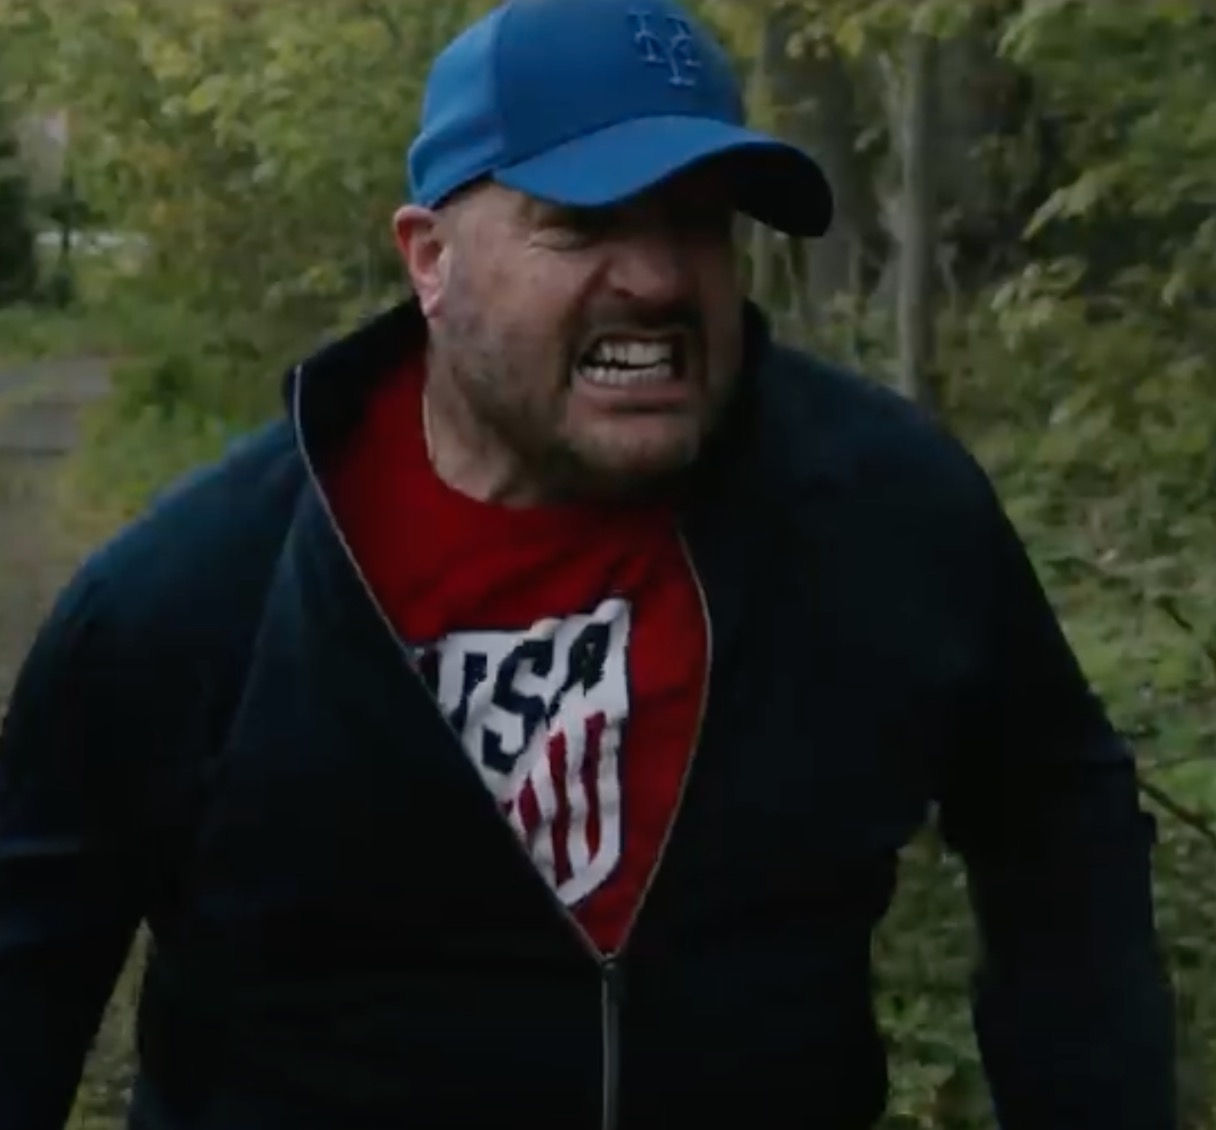 Kevin James chose this Mets cap to wear in his short film - The Mets Police